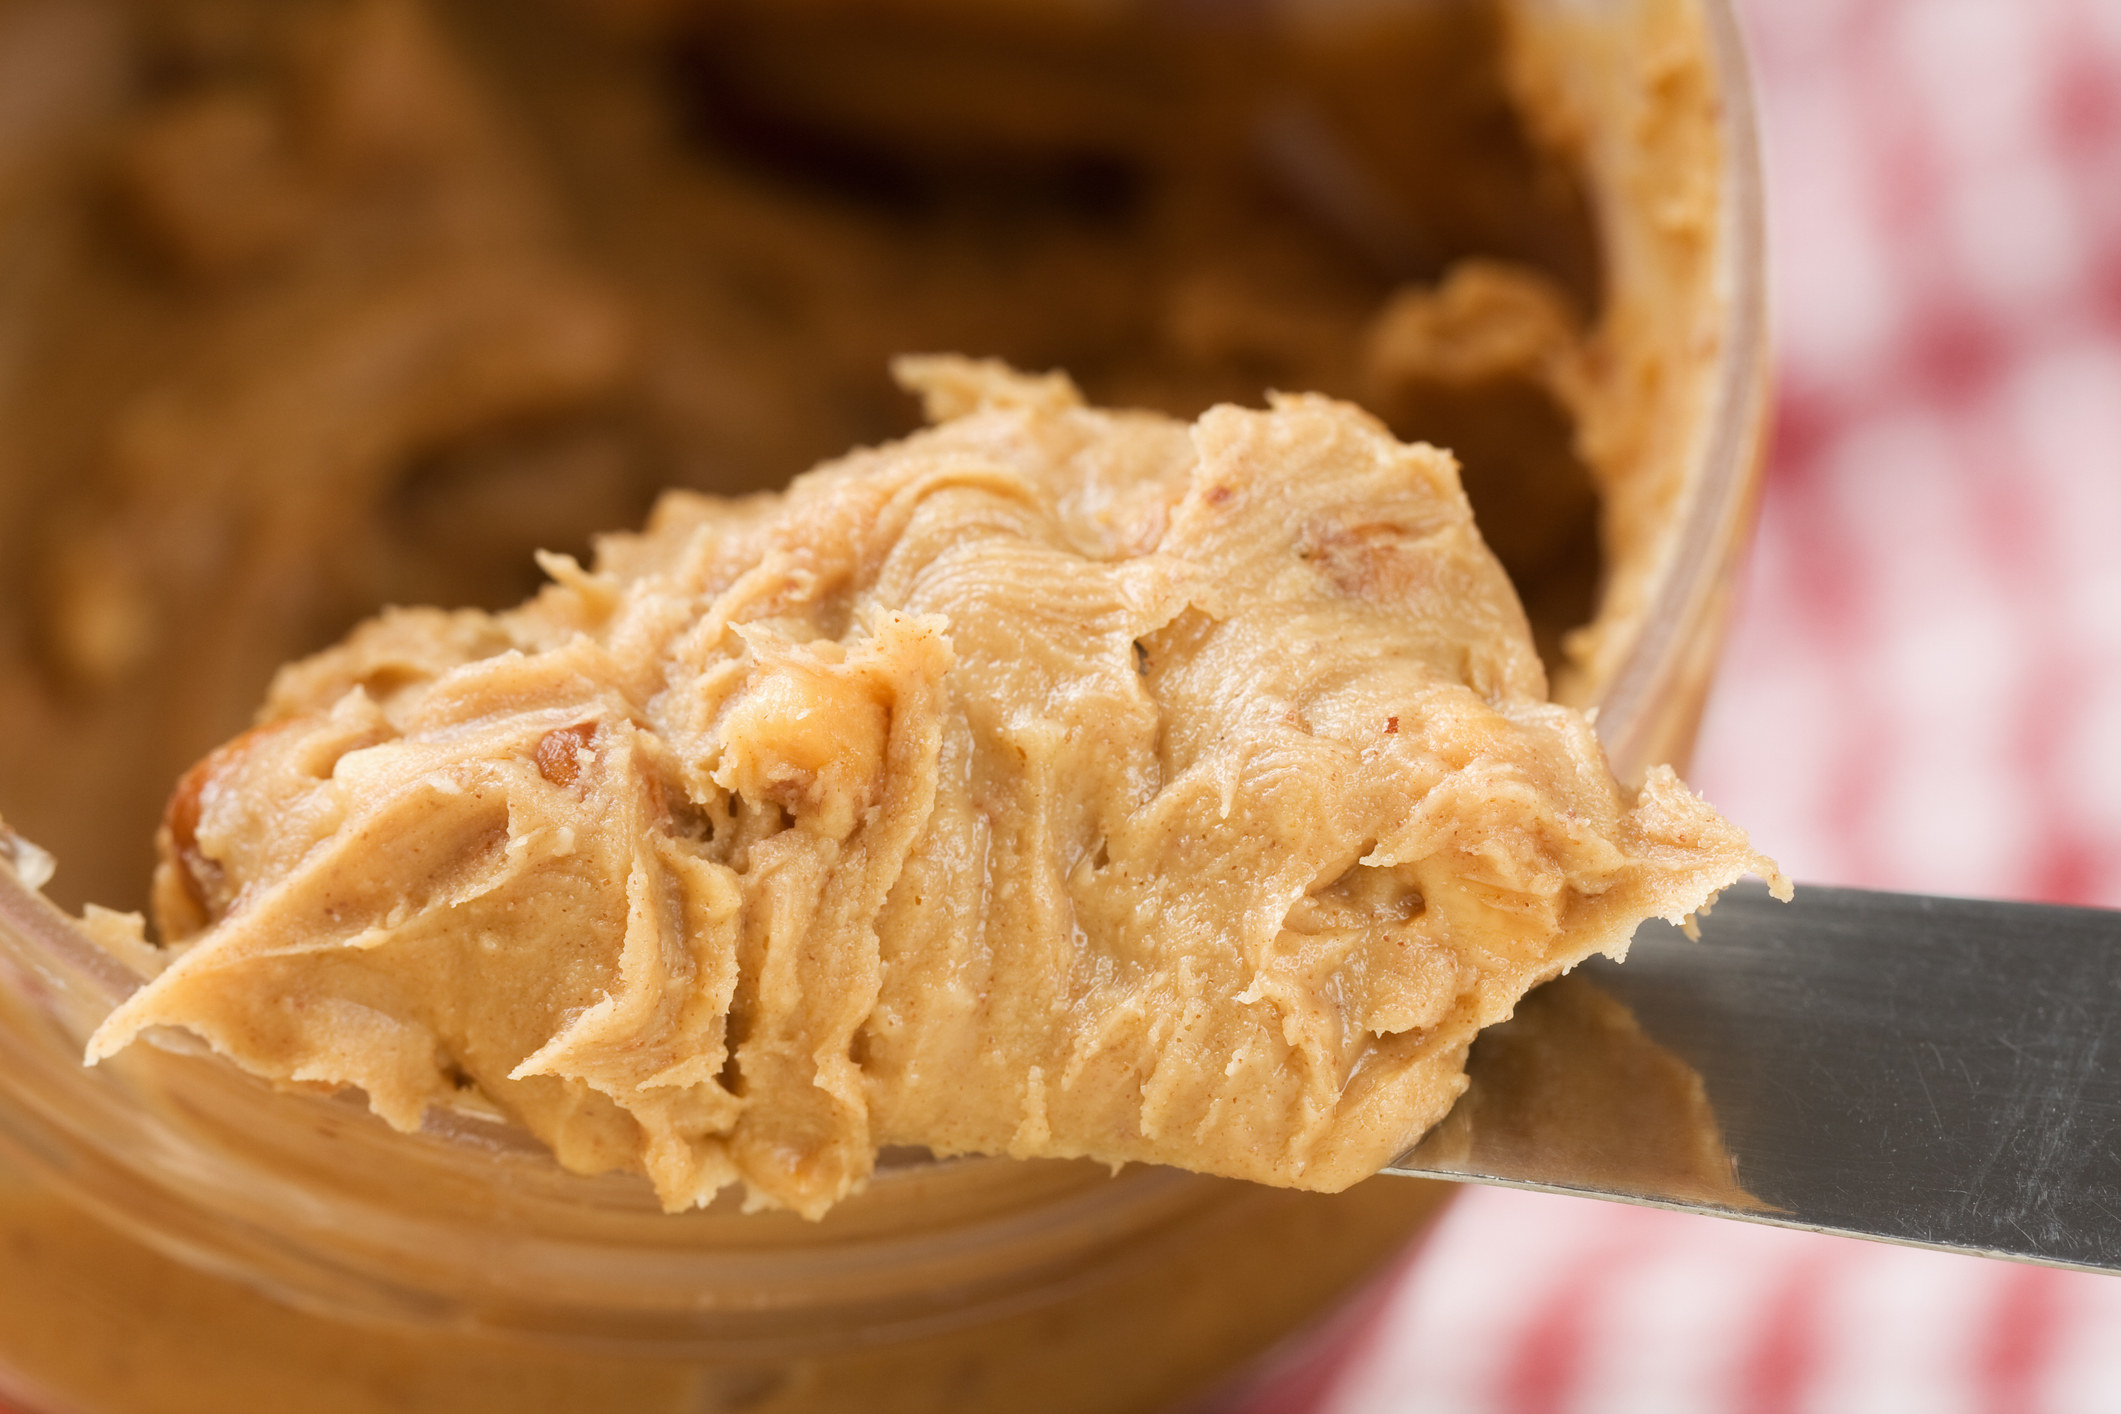 A heap of crunchy peanut butter on a knife coming out of the jar